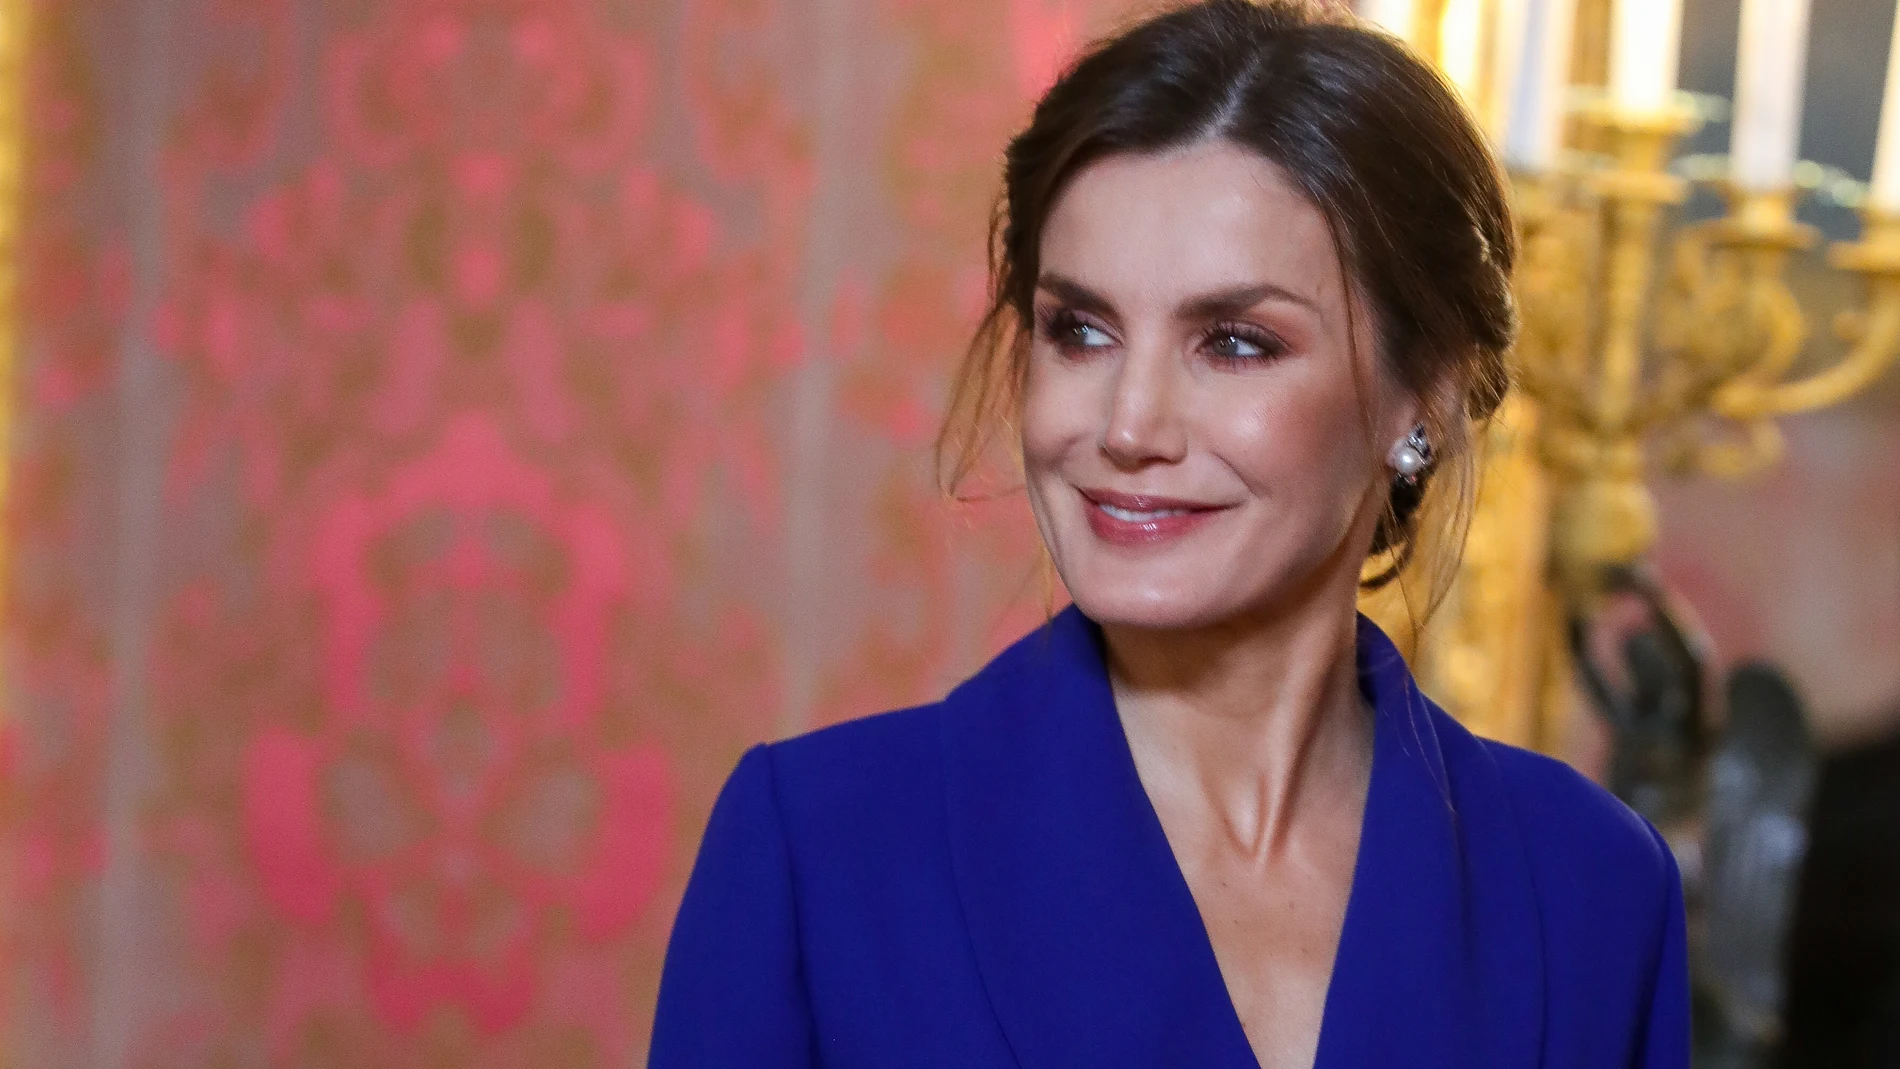 Queen Letizia Ortiz during the Military Easter 2020 at RoyalPalace in Madrid on Monday 6th January 2020.